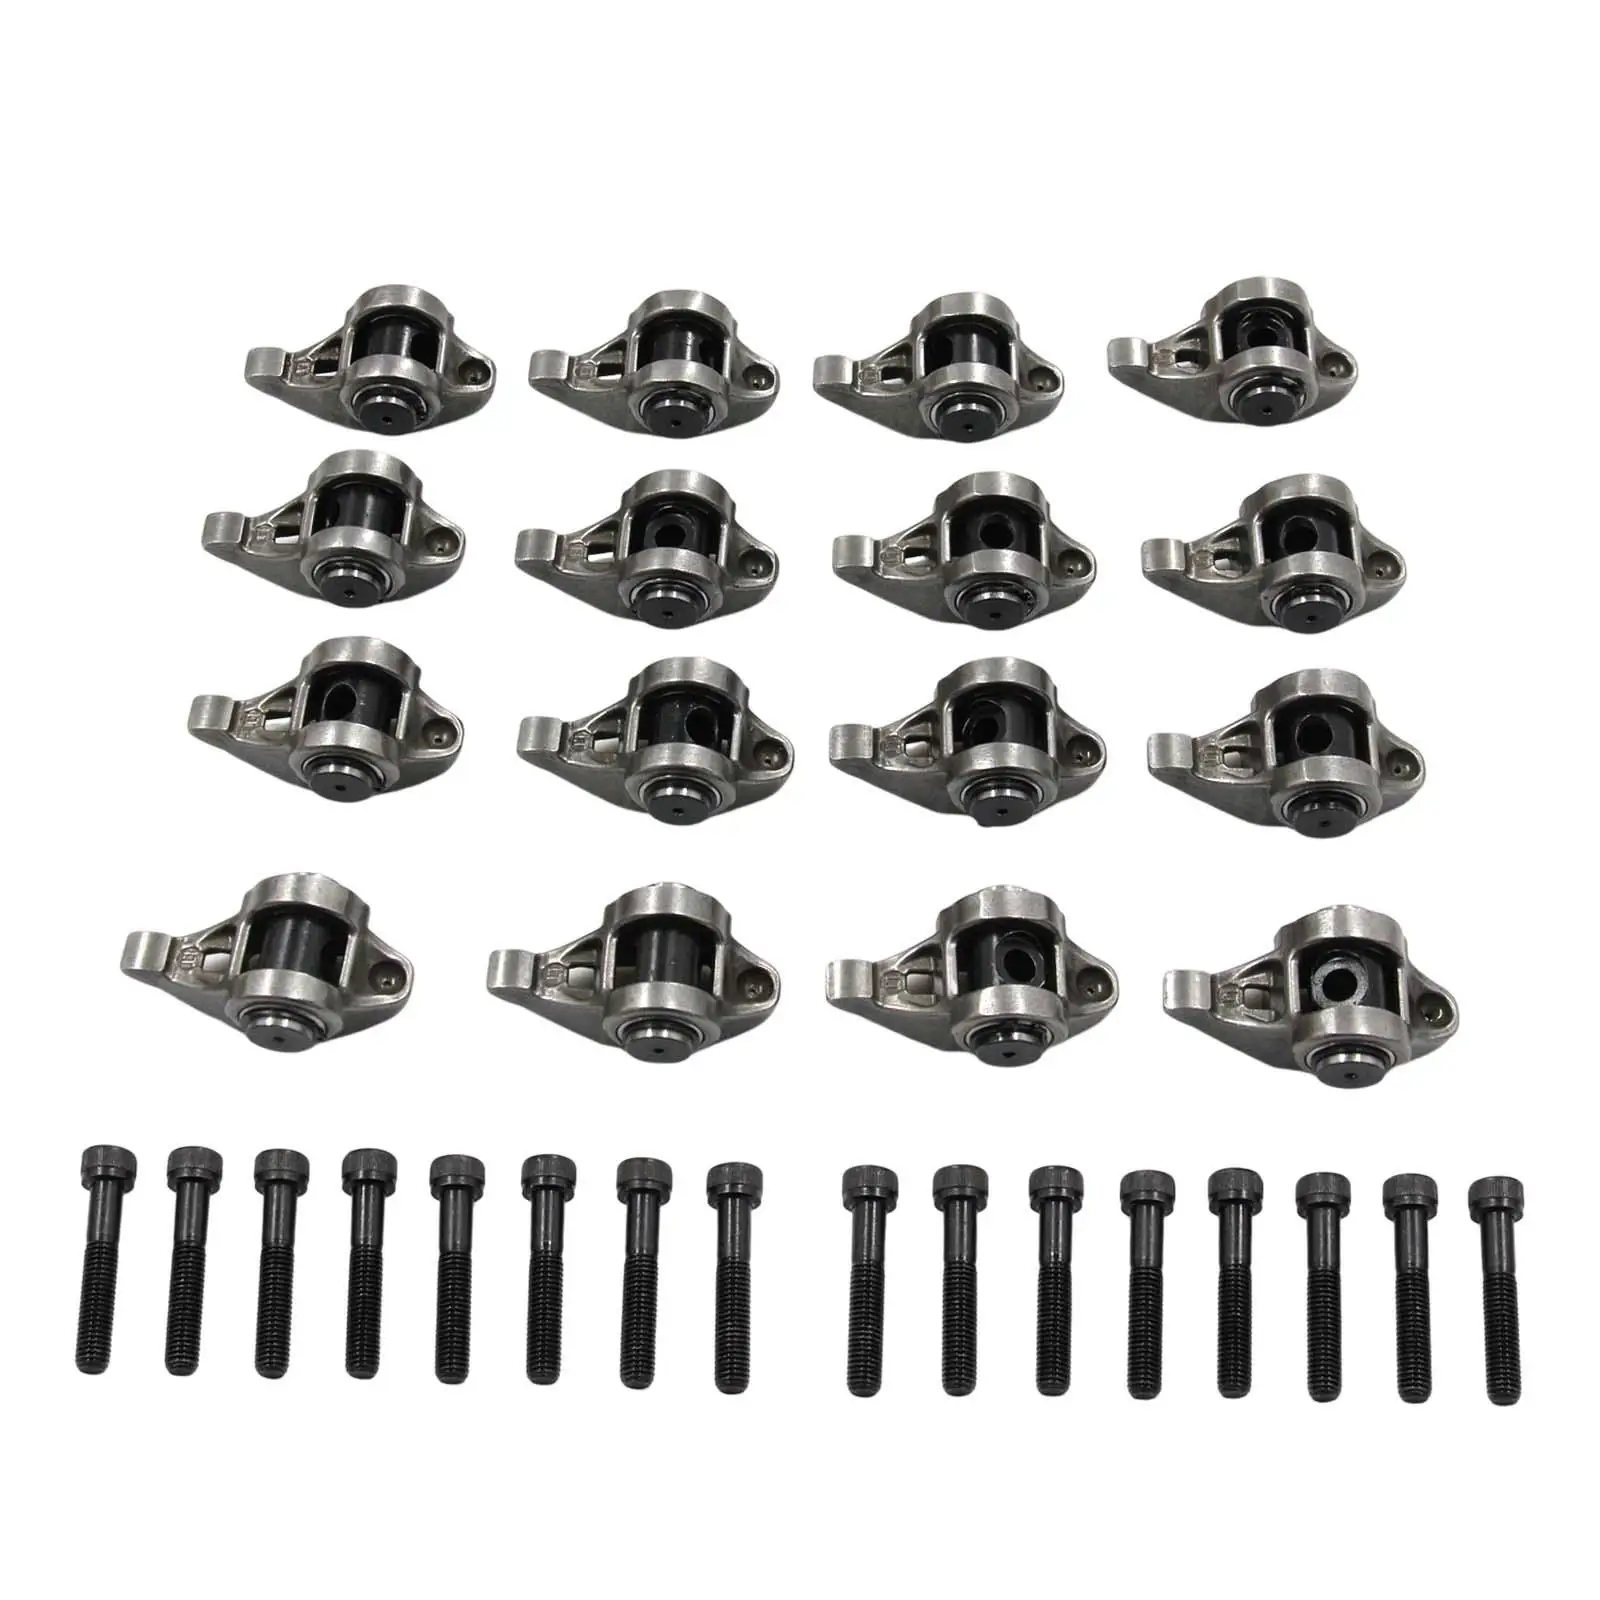 16 Pieces Rocker Arms and Bolts Kit Steel for Chevrolet LS1 LS2 LS3 LS6